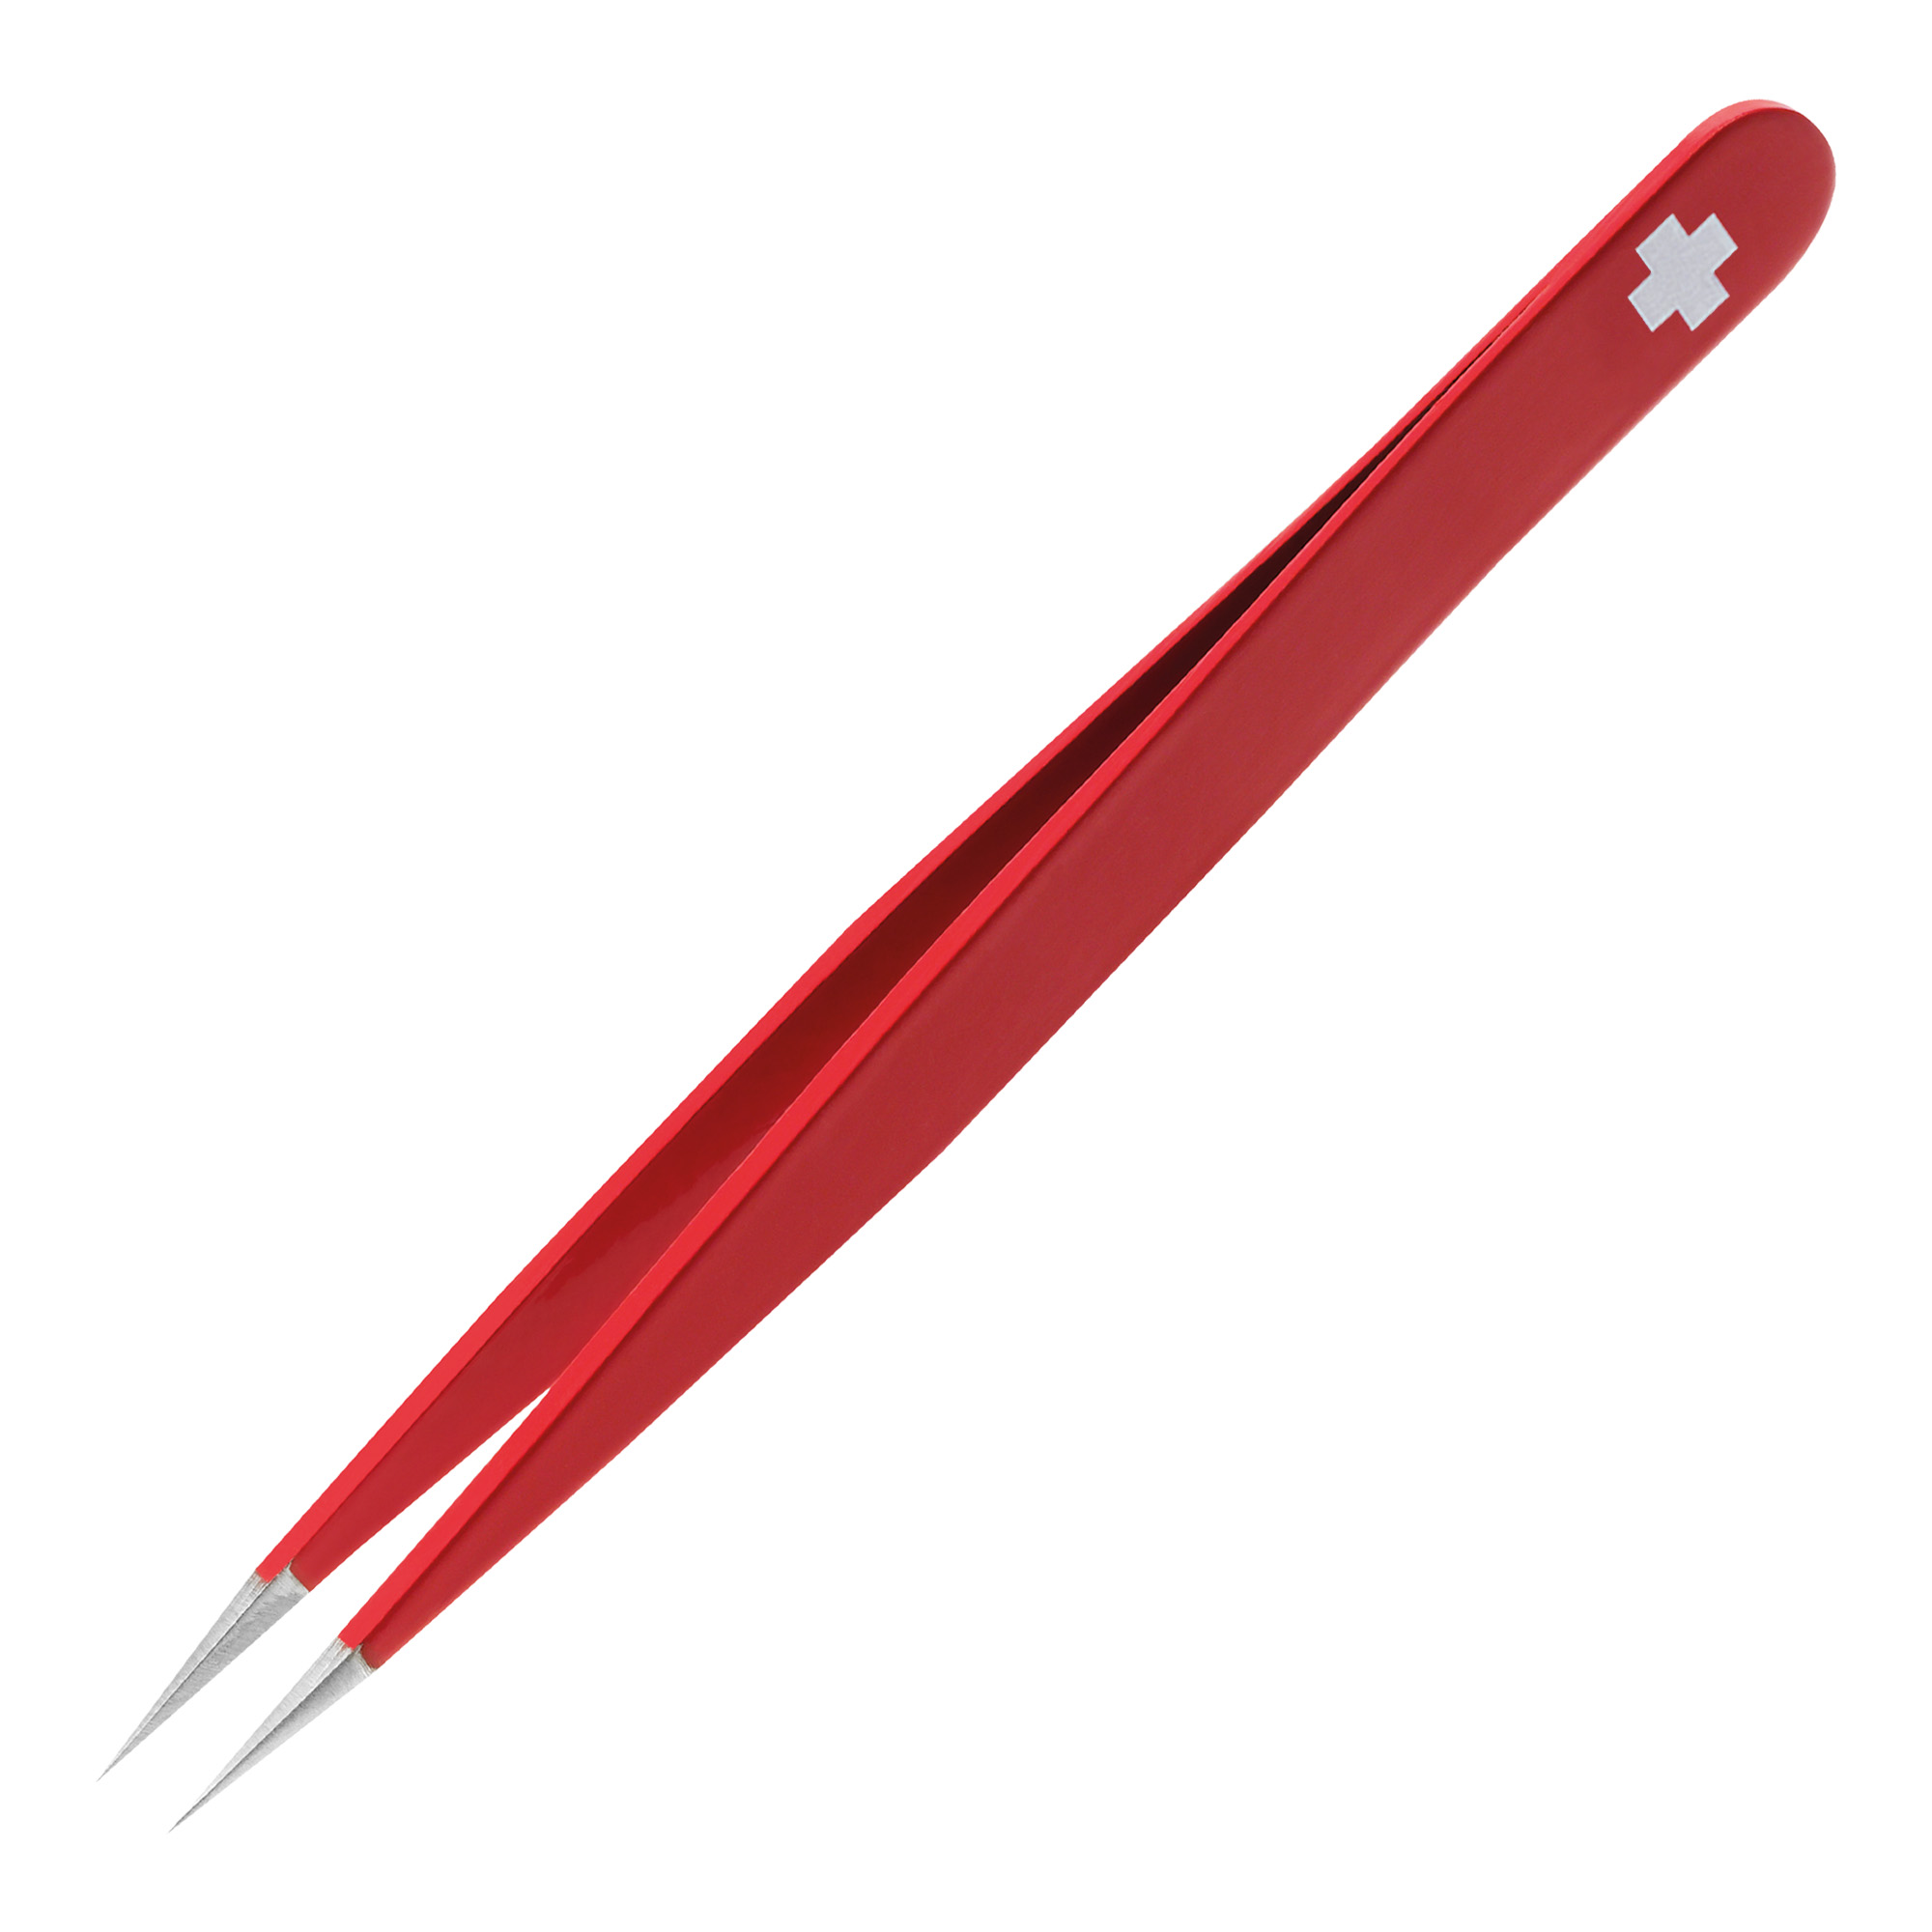 Rubis stainless steel tweezers with pointed tip Swiss Cross red